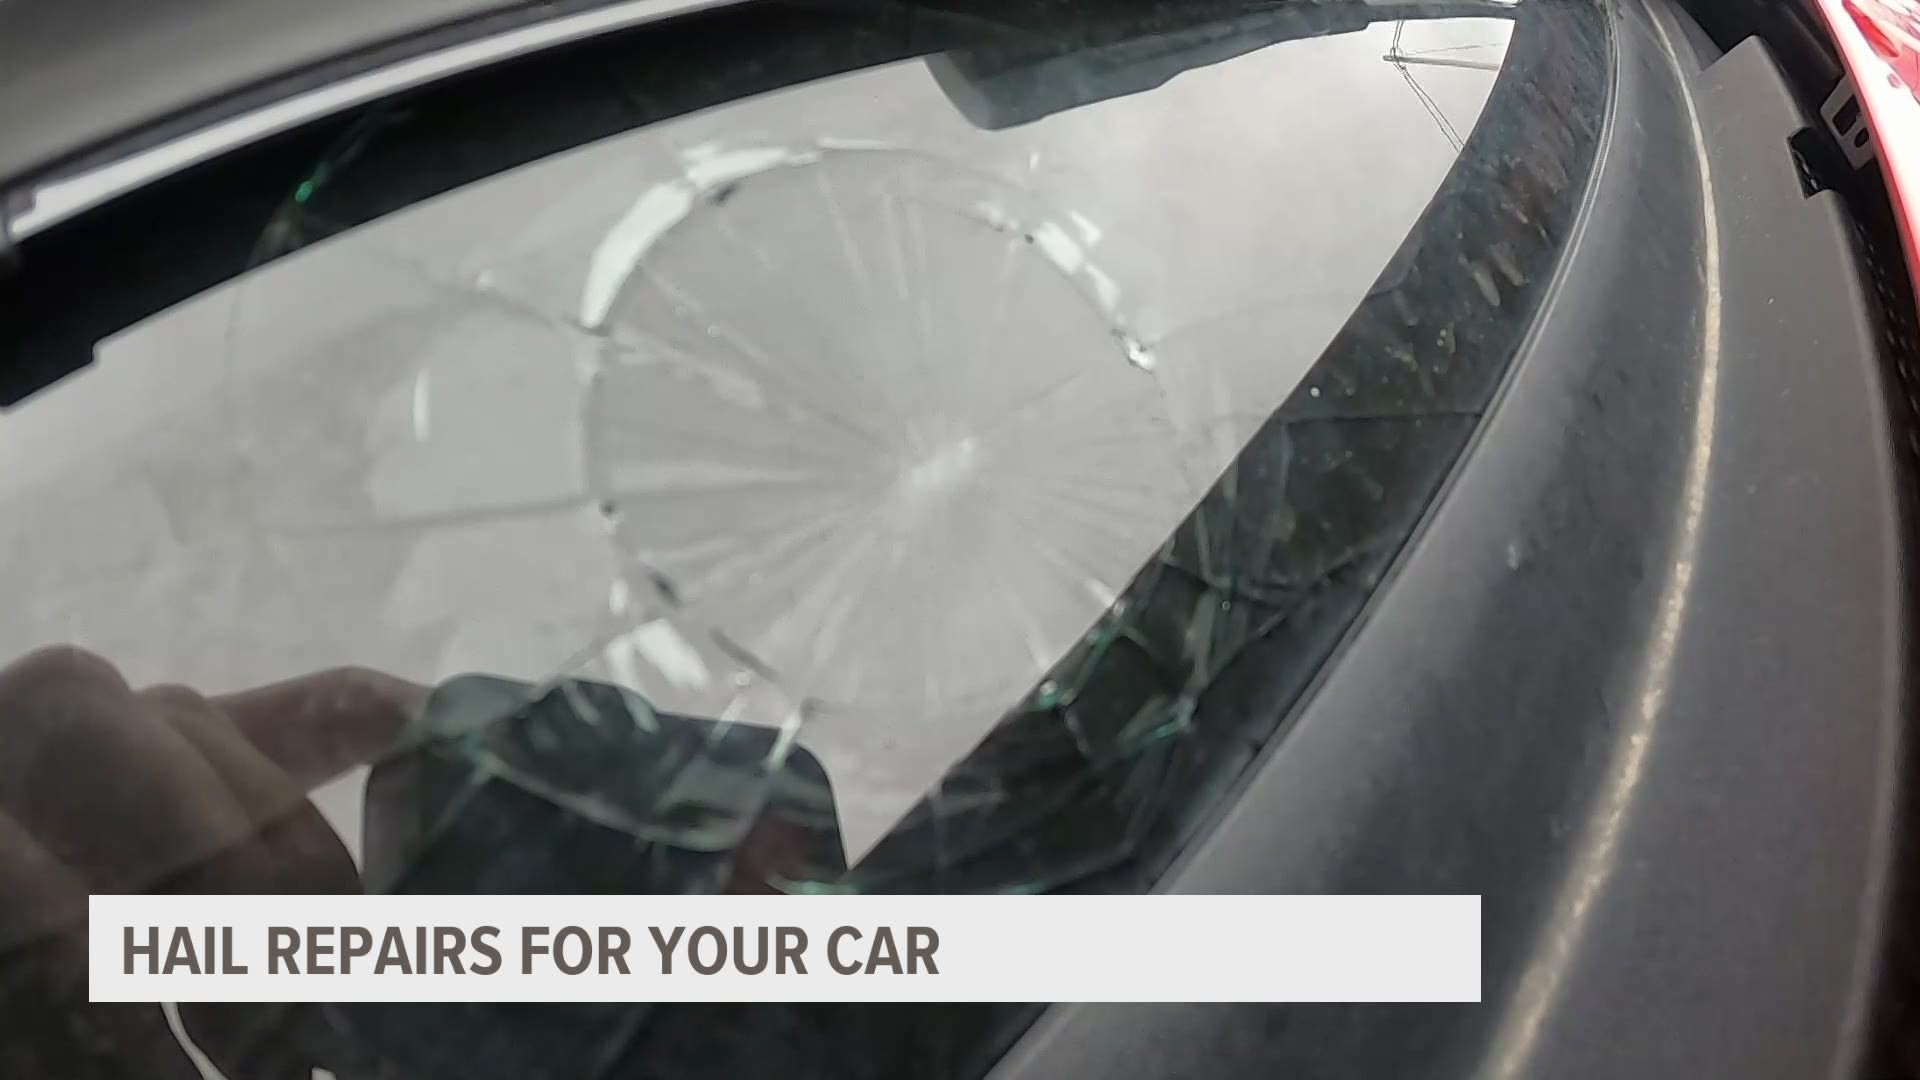 Important tips to keep in mind when seeking repair for roof or car hail damage